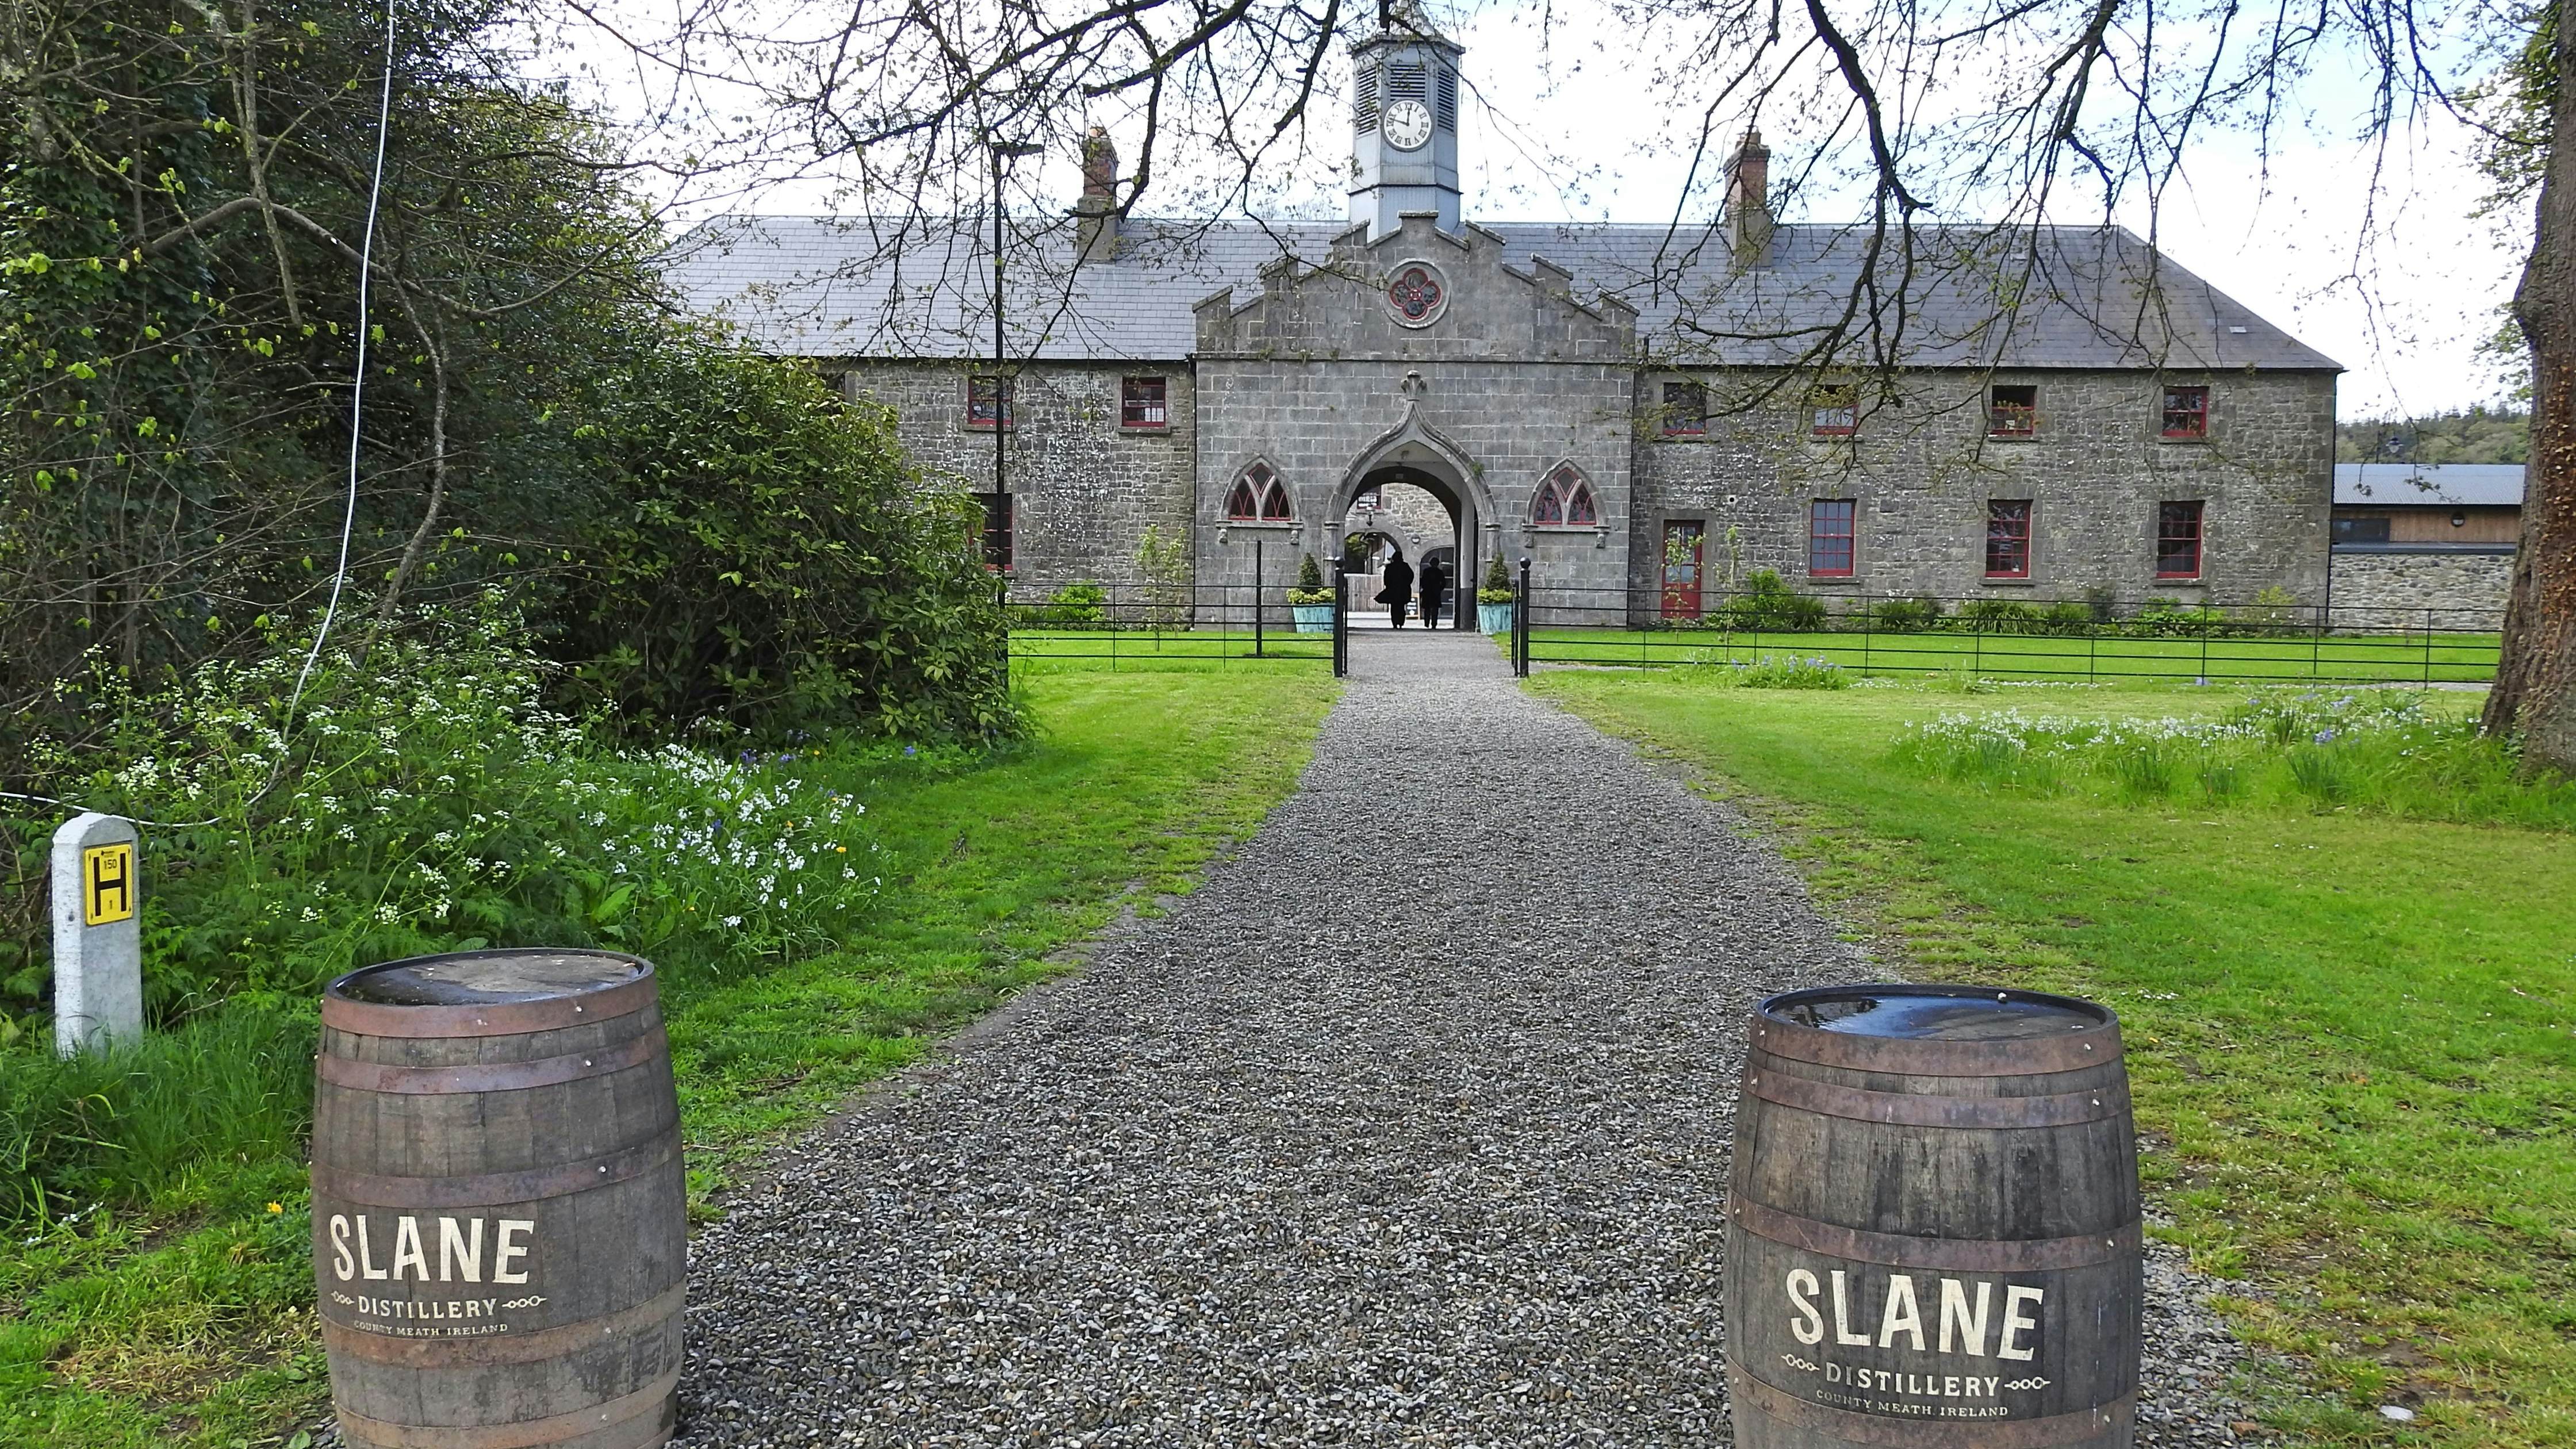 Let the spirit move you at the world's most unique distilleries